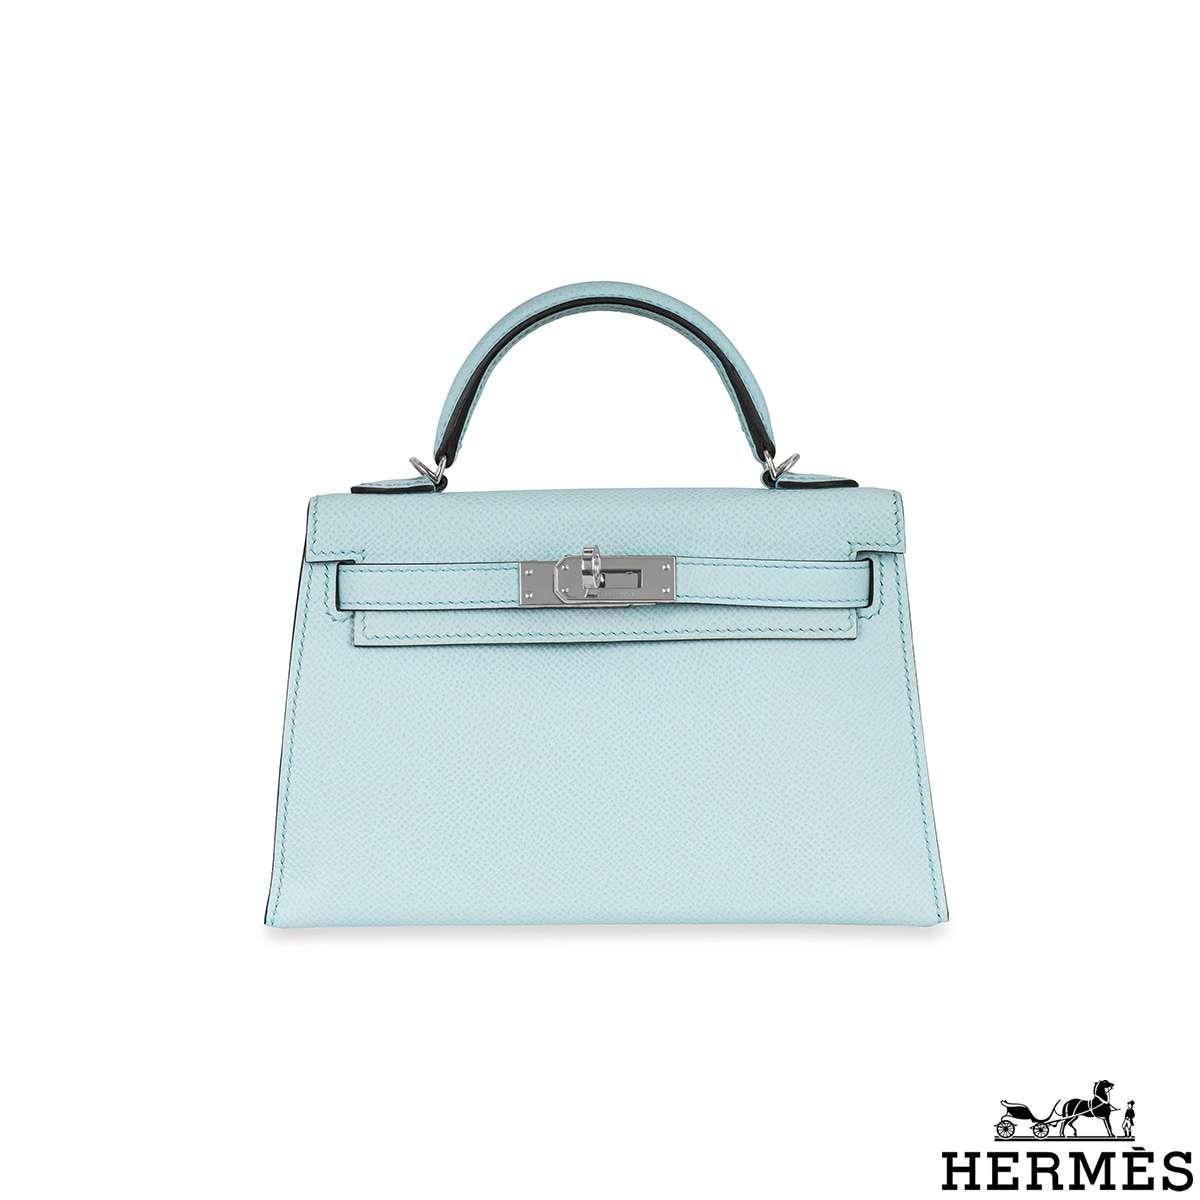 A lovely Hermès Kelly Mini II handbag. The exterior of this Kelly Mini features Bleu Zephyr Veau Epsom leather and is complemented by palladium hardware and tonal stitchings. It has a front toggle closure with two straps, a single rolled handle and